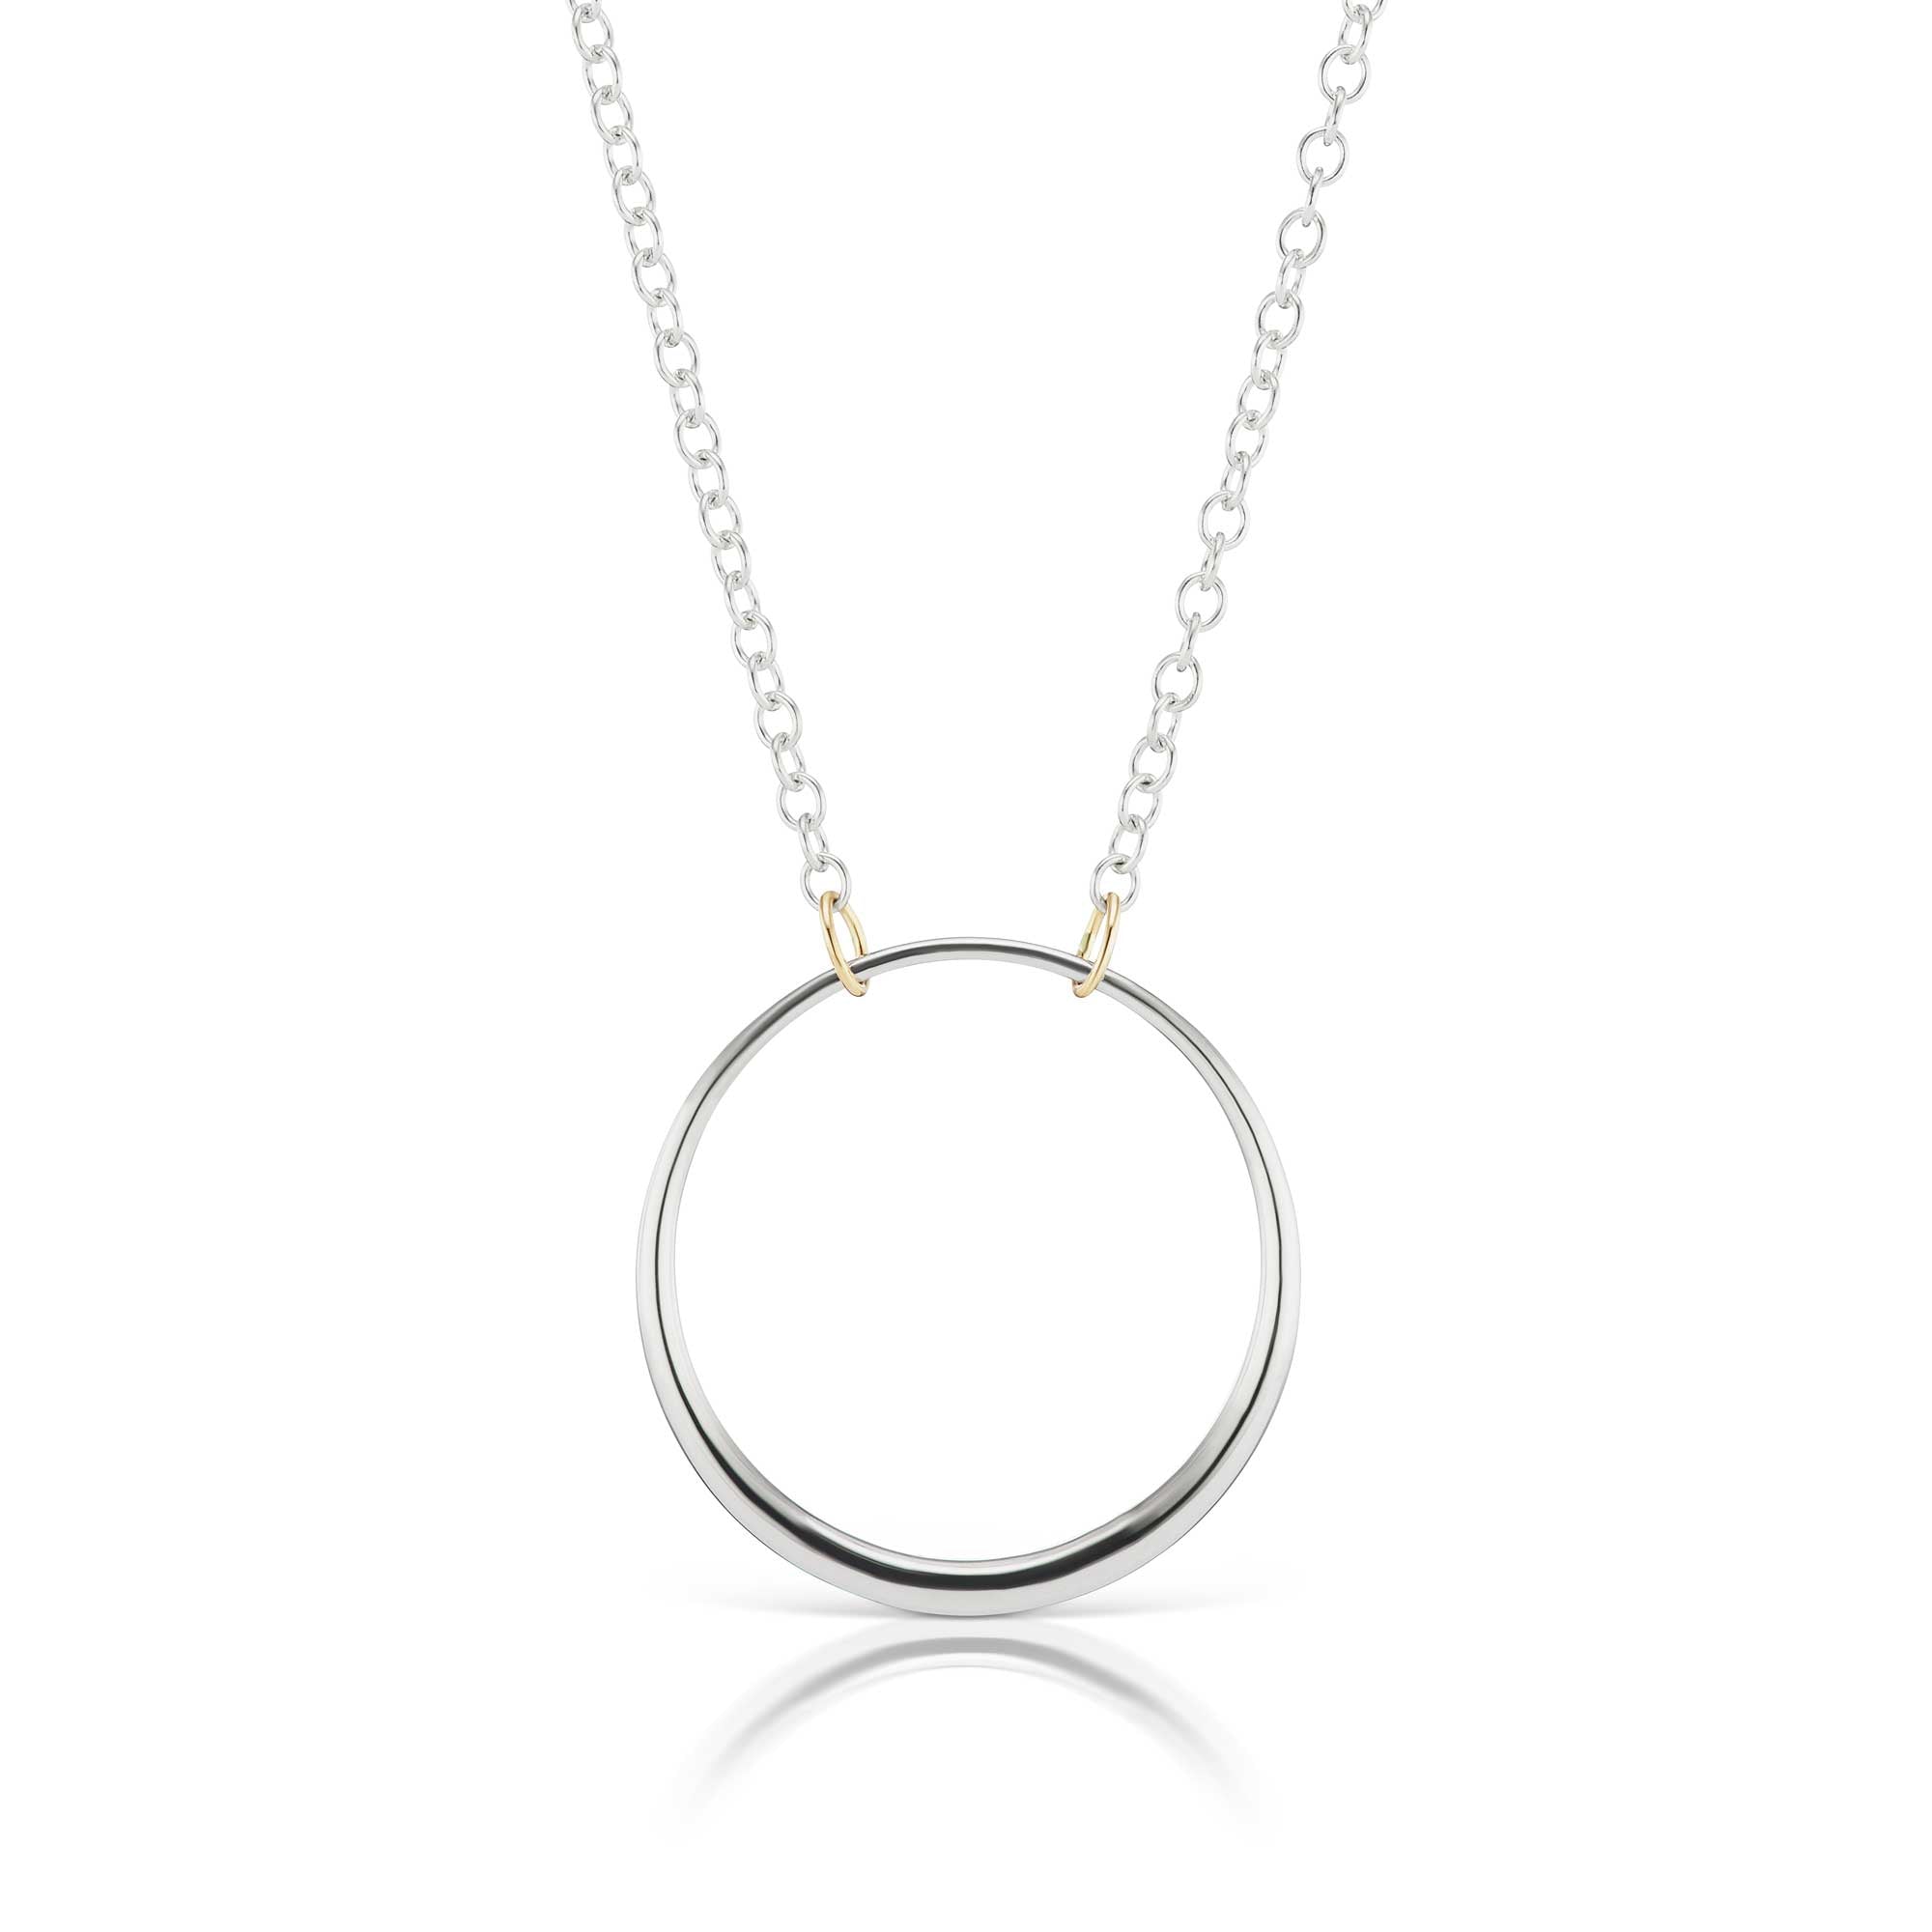 The Silver Loop Necklace